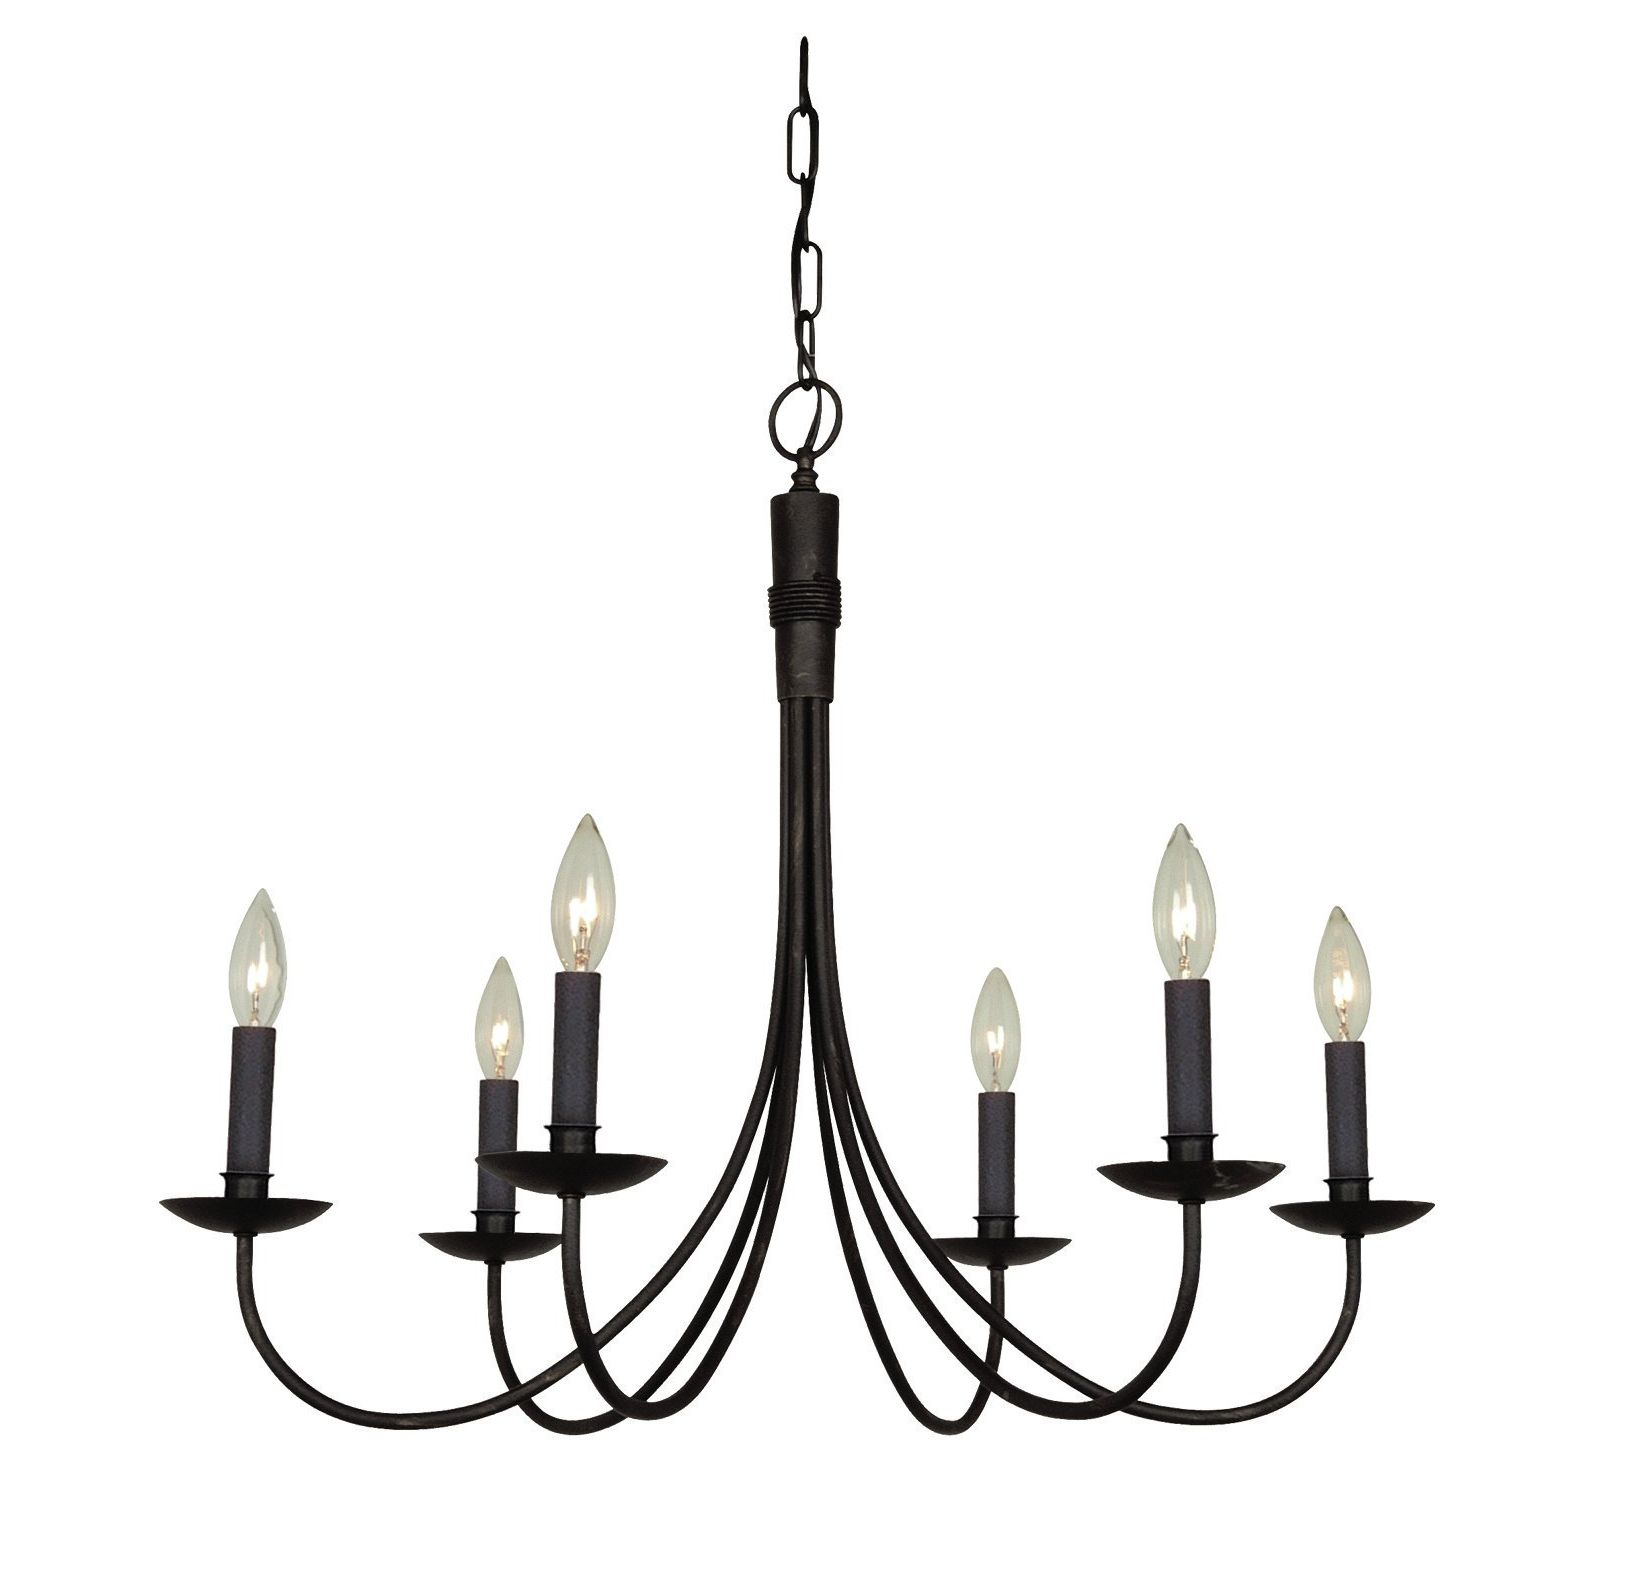 Souders 6 Light Candle Style Chandelier With Fashionable Perseus 6 Light Candle Style Chandeliers (View 18 of 20)